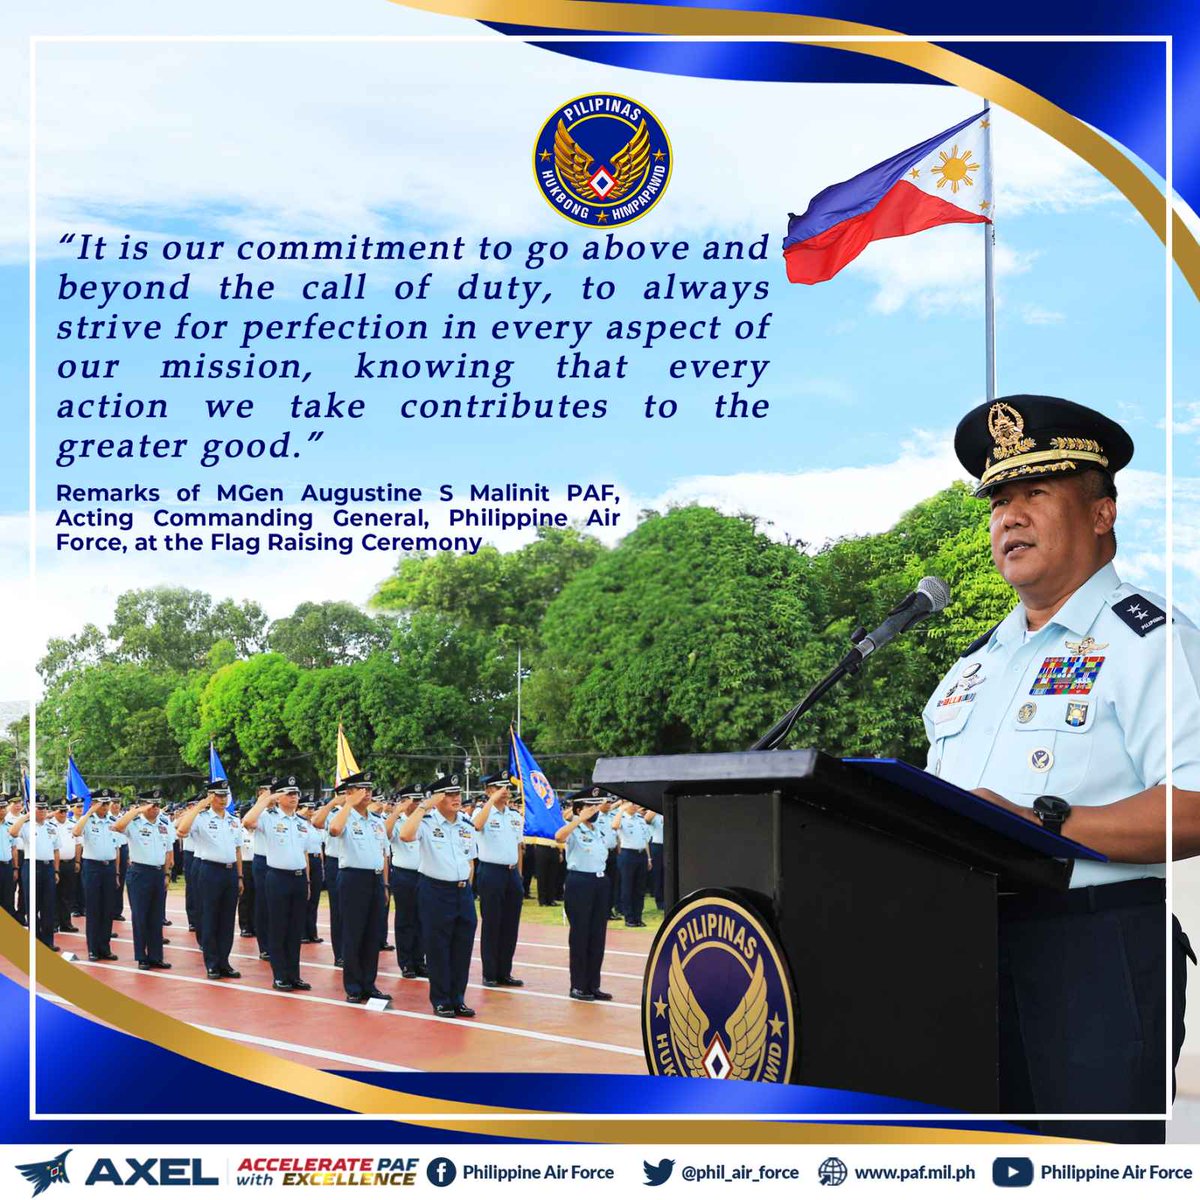 PAF HIGHLIGHTS The Acting Commanding General of the PAF, MGen Augustine S Malinit PAF, emphasized to the PAF personnel the importance of maintaining excellence as a guiding principle to serve the Filipino people with the highest capabilities as the guardians of the skies.